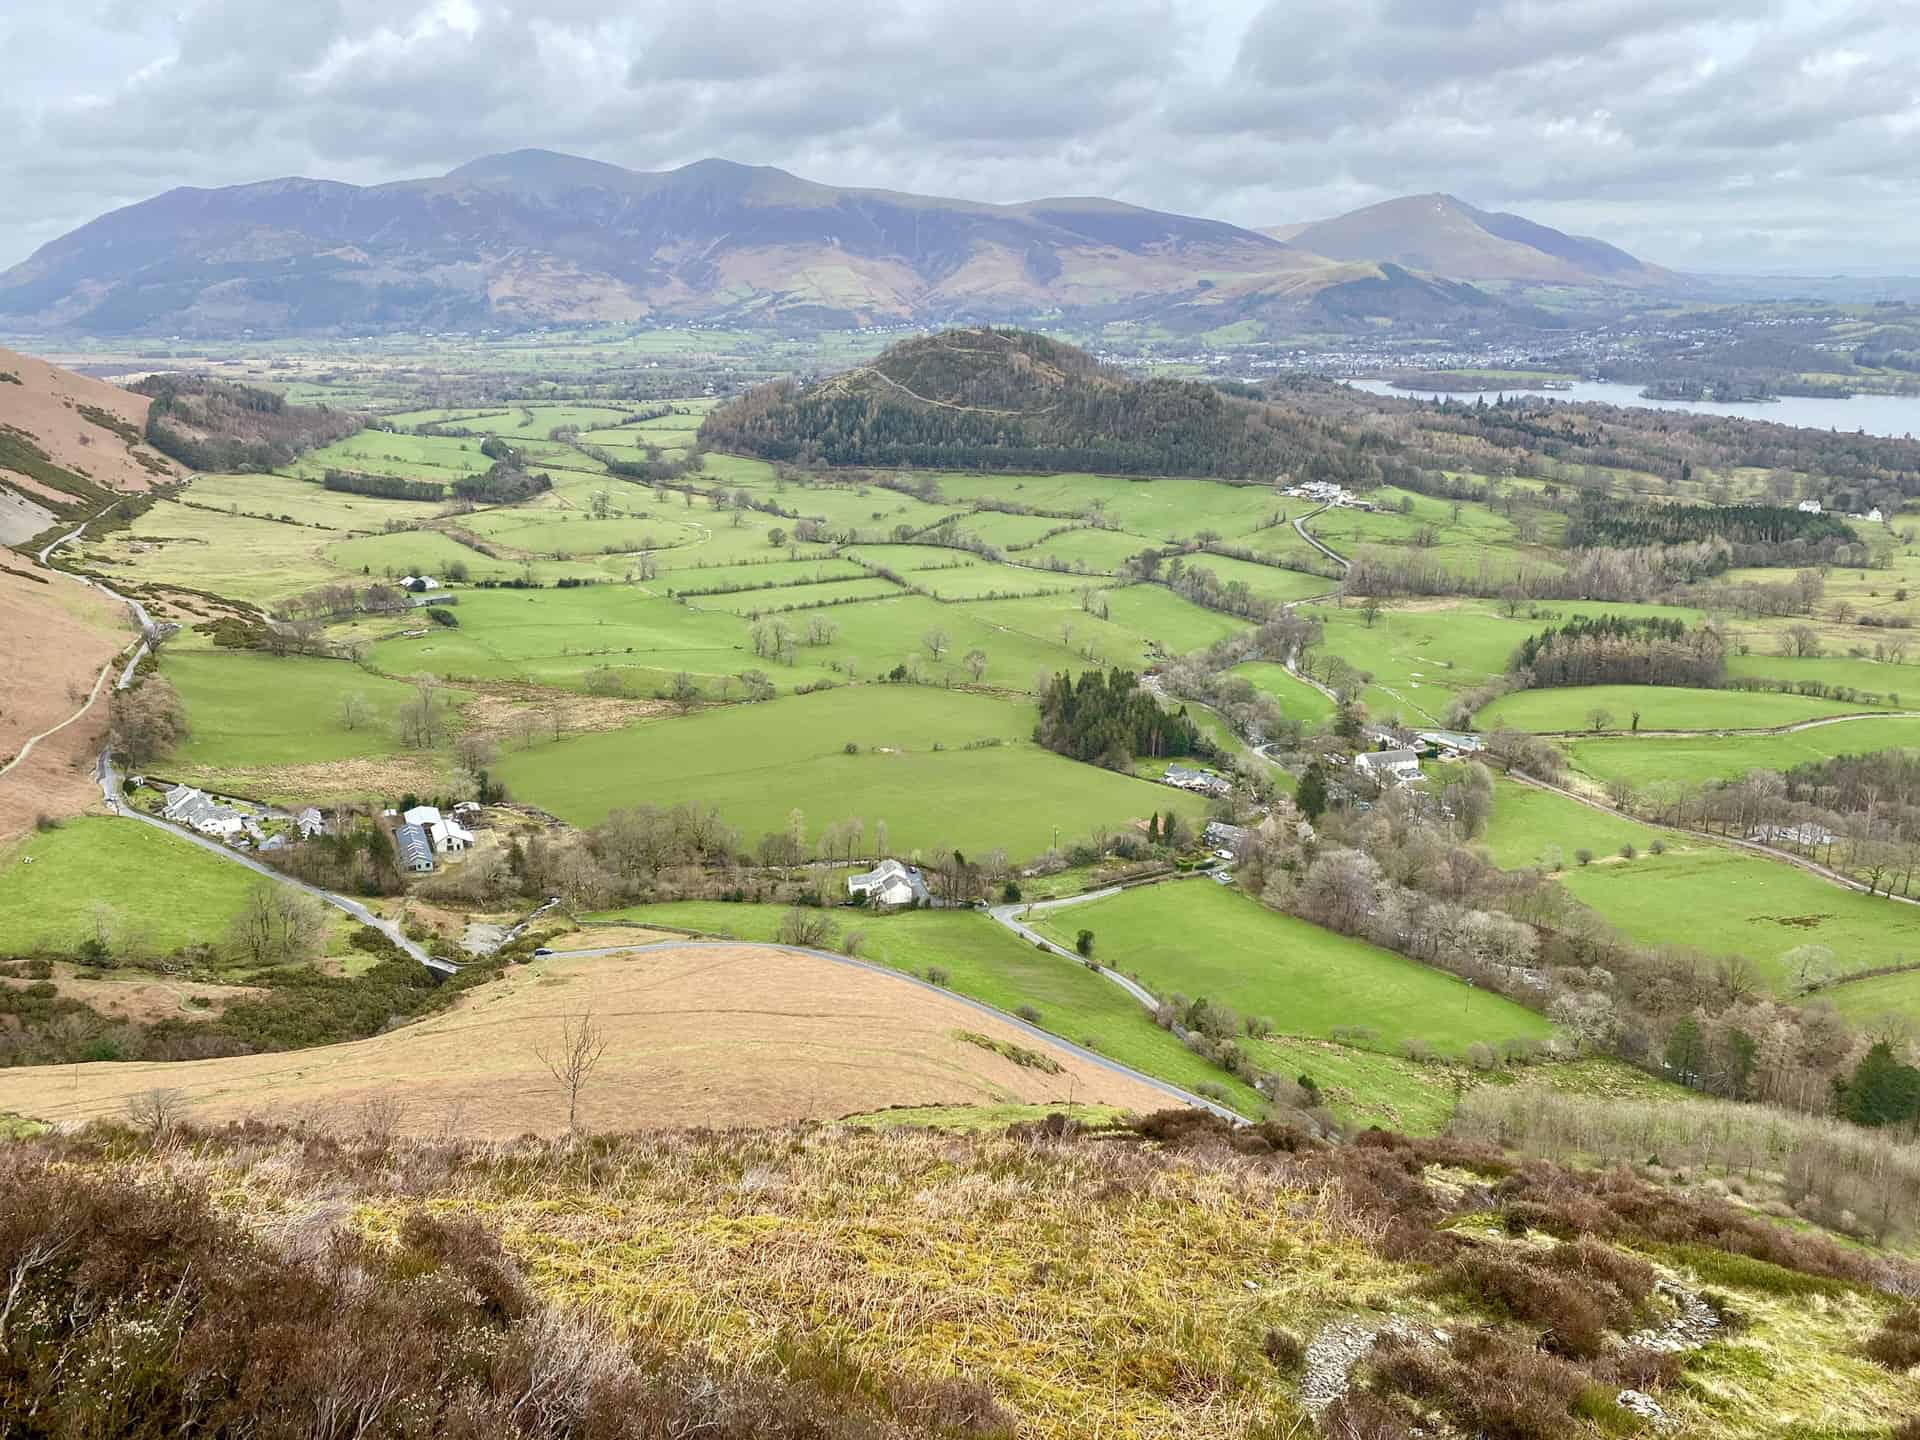 The view north from the slopes of Rowling End towards the Skiddaw range of mountains.